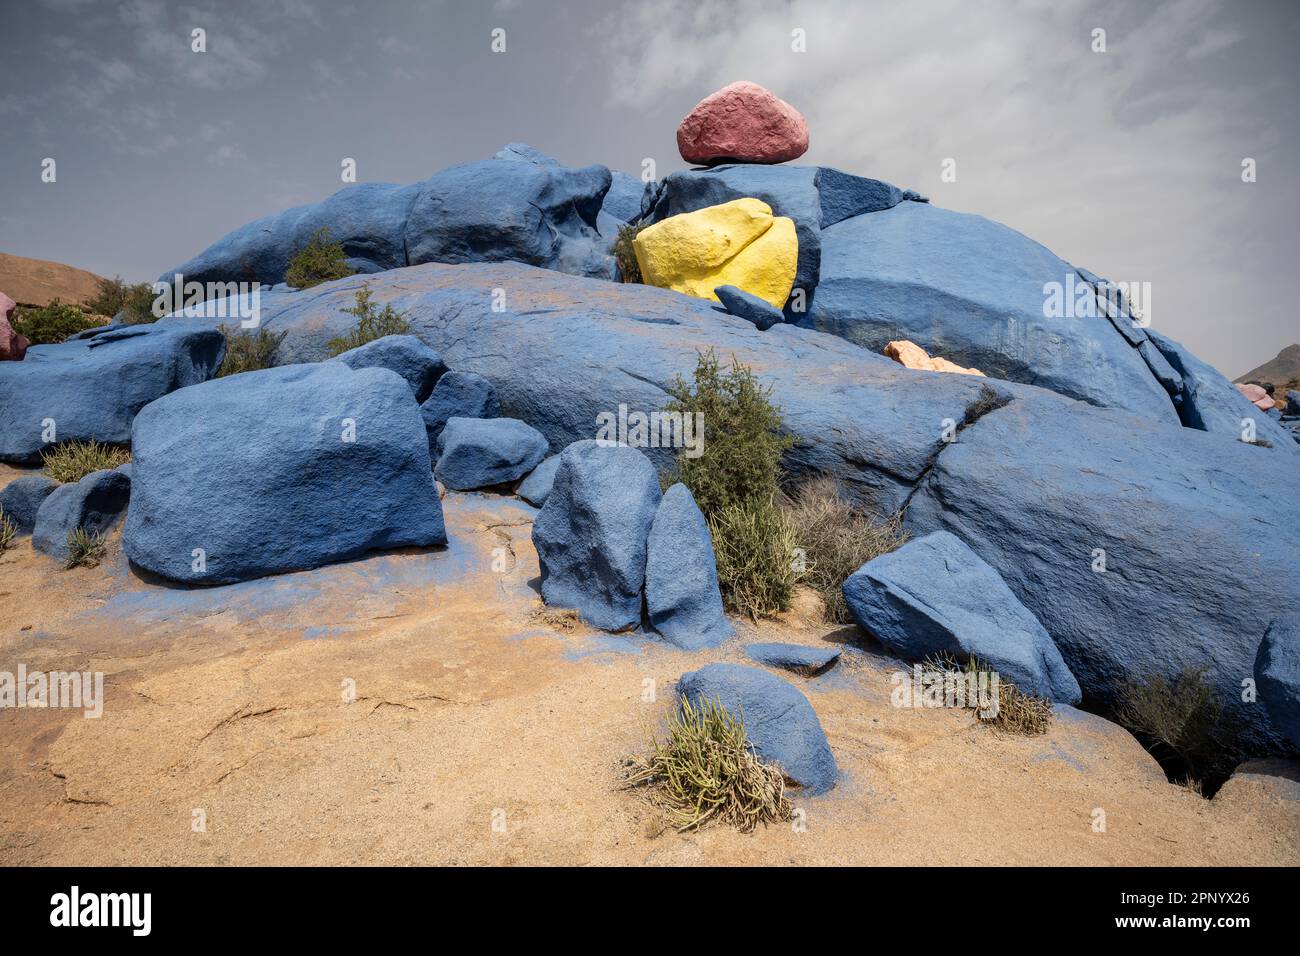 Painted rocks in the desert near Tafraoute. Stock Photo